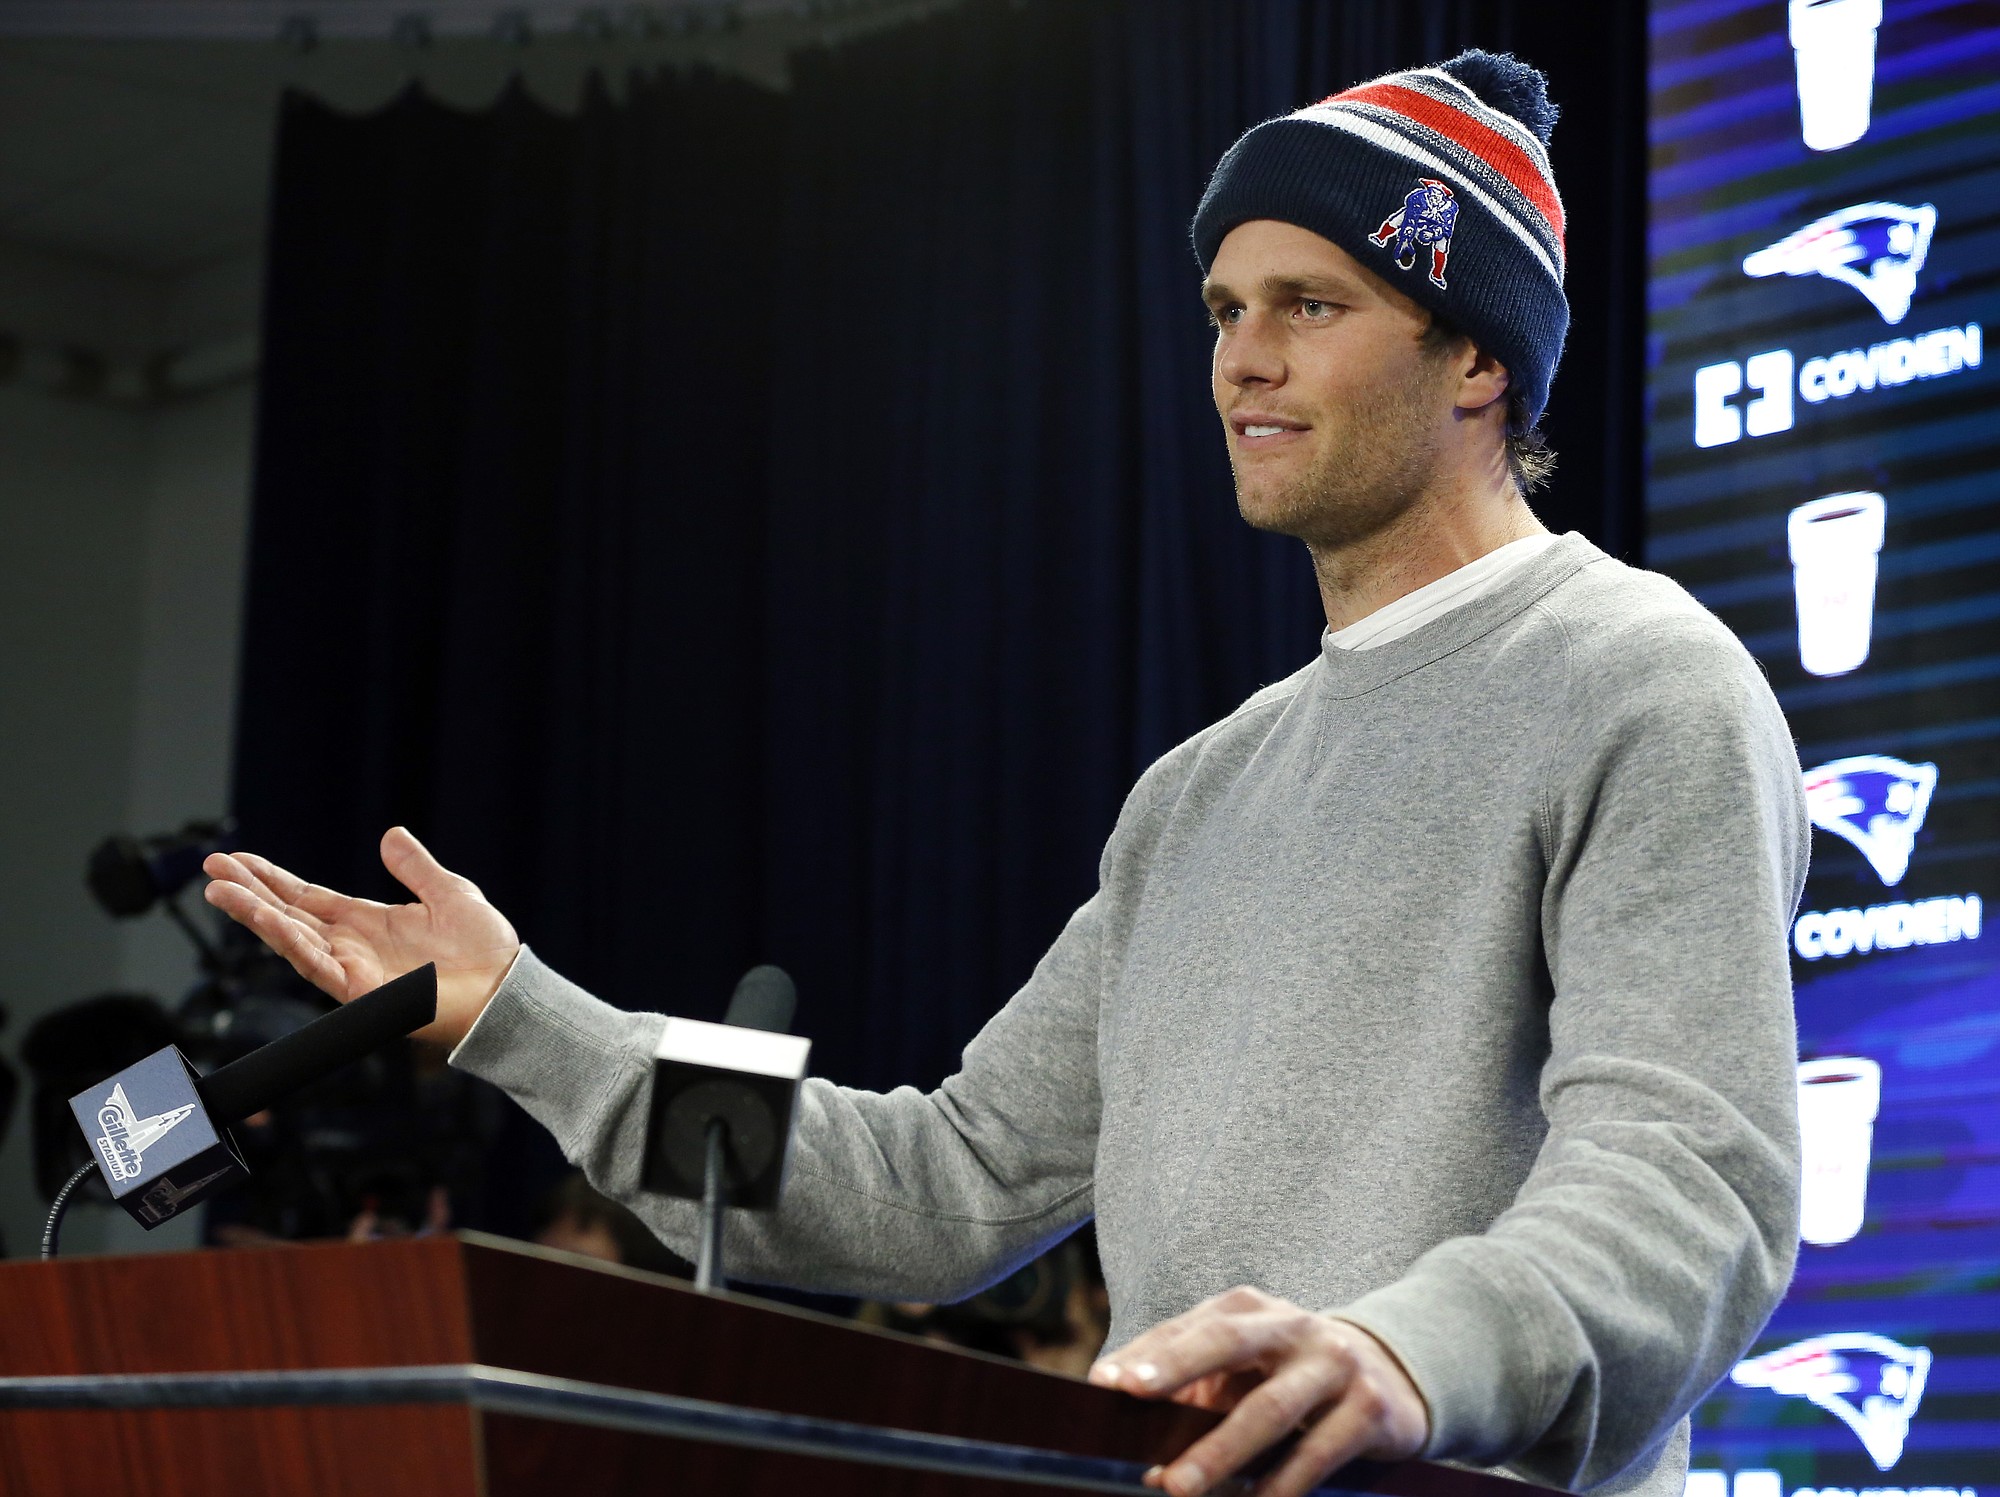 In this Jan. 22, 2015, file photo, New England Patriots quarterback Tom Brady speaks at a news conference about the NFL investigation into deflated footballs, in Foxborough, Mass. An NFL investigation has found that New England Patriots employees likely deflated footballs and that quarterback Tom Brady was &quot;at least generally aware&quot; of the rules violations.